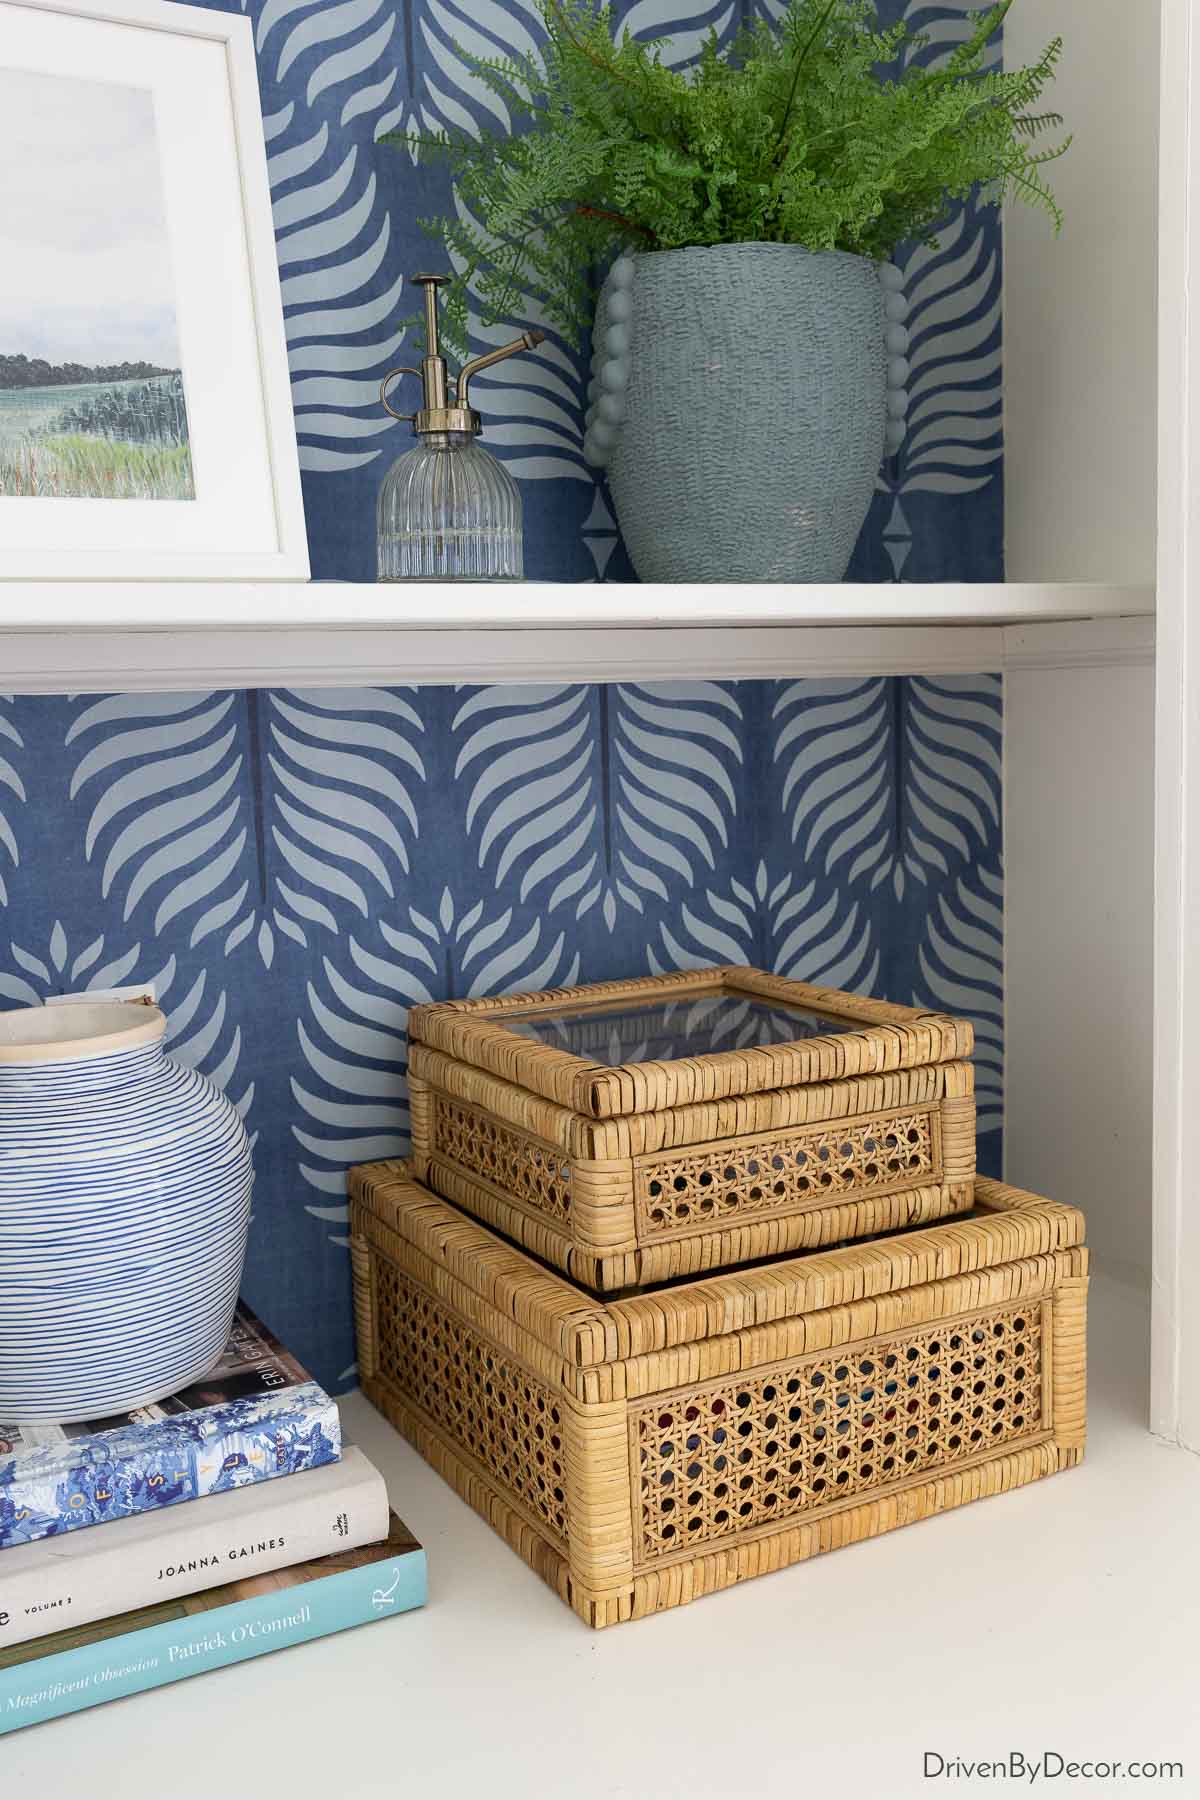 Pair of rattan boxes on bookcase shelves